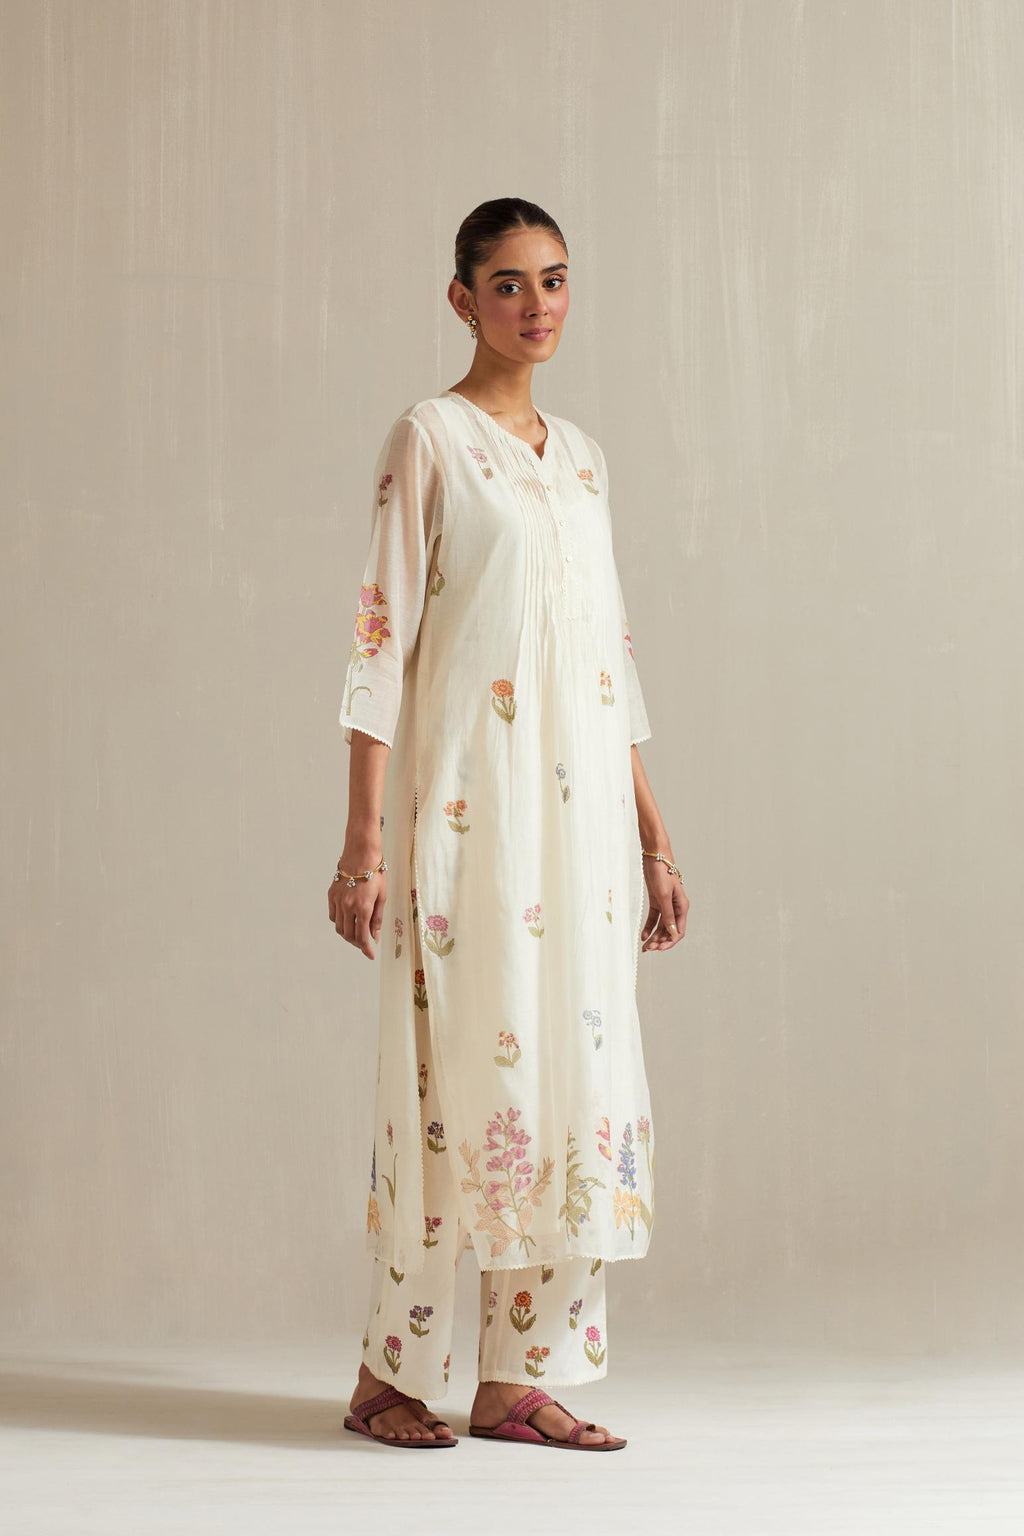 Off white cotton chanderi hand block printed straight kurta set with pin tucks at yoke and all-over multi colored flower.